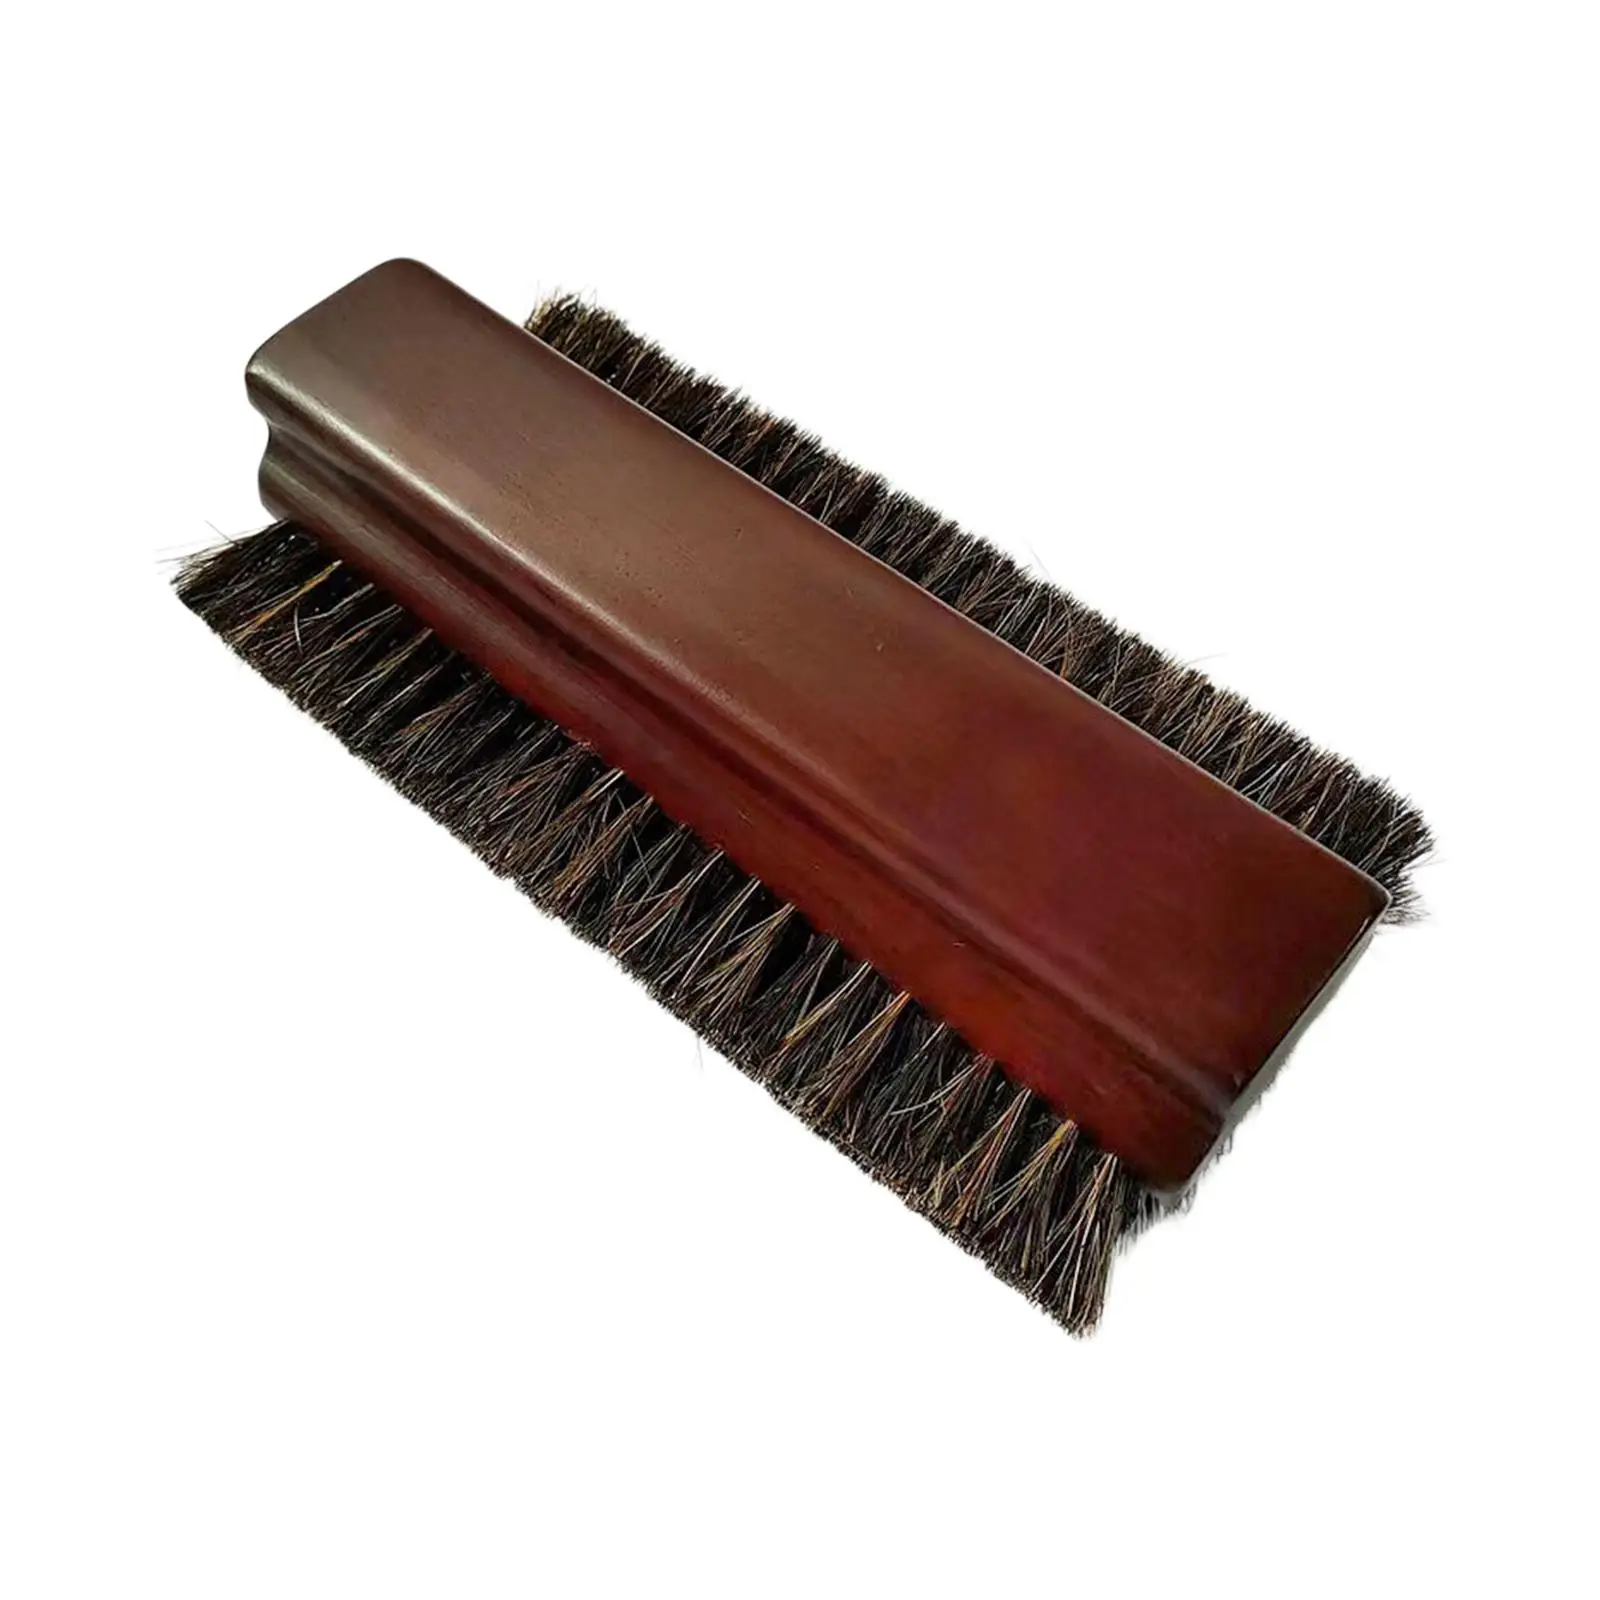 Horse Hair Brushes Practical Durable Easy Cleaning Wooden Handle Bristles Portable Horsehair Brush Billiards Table Cleaning Tool